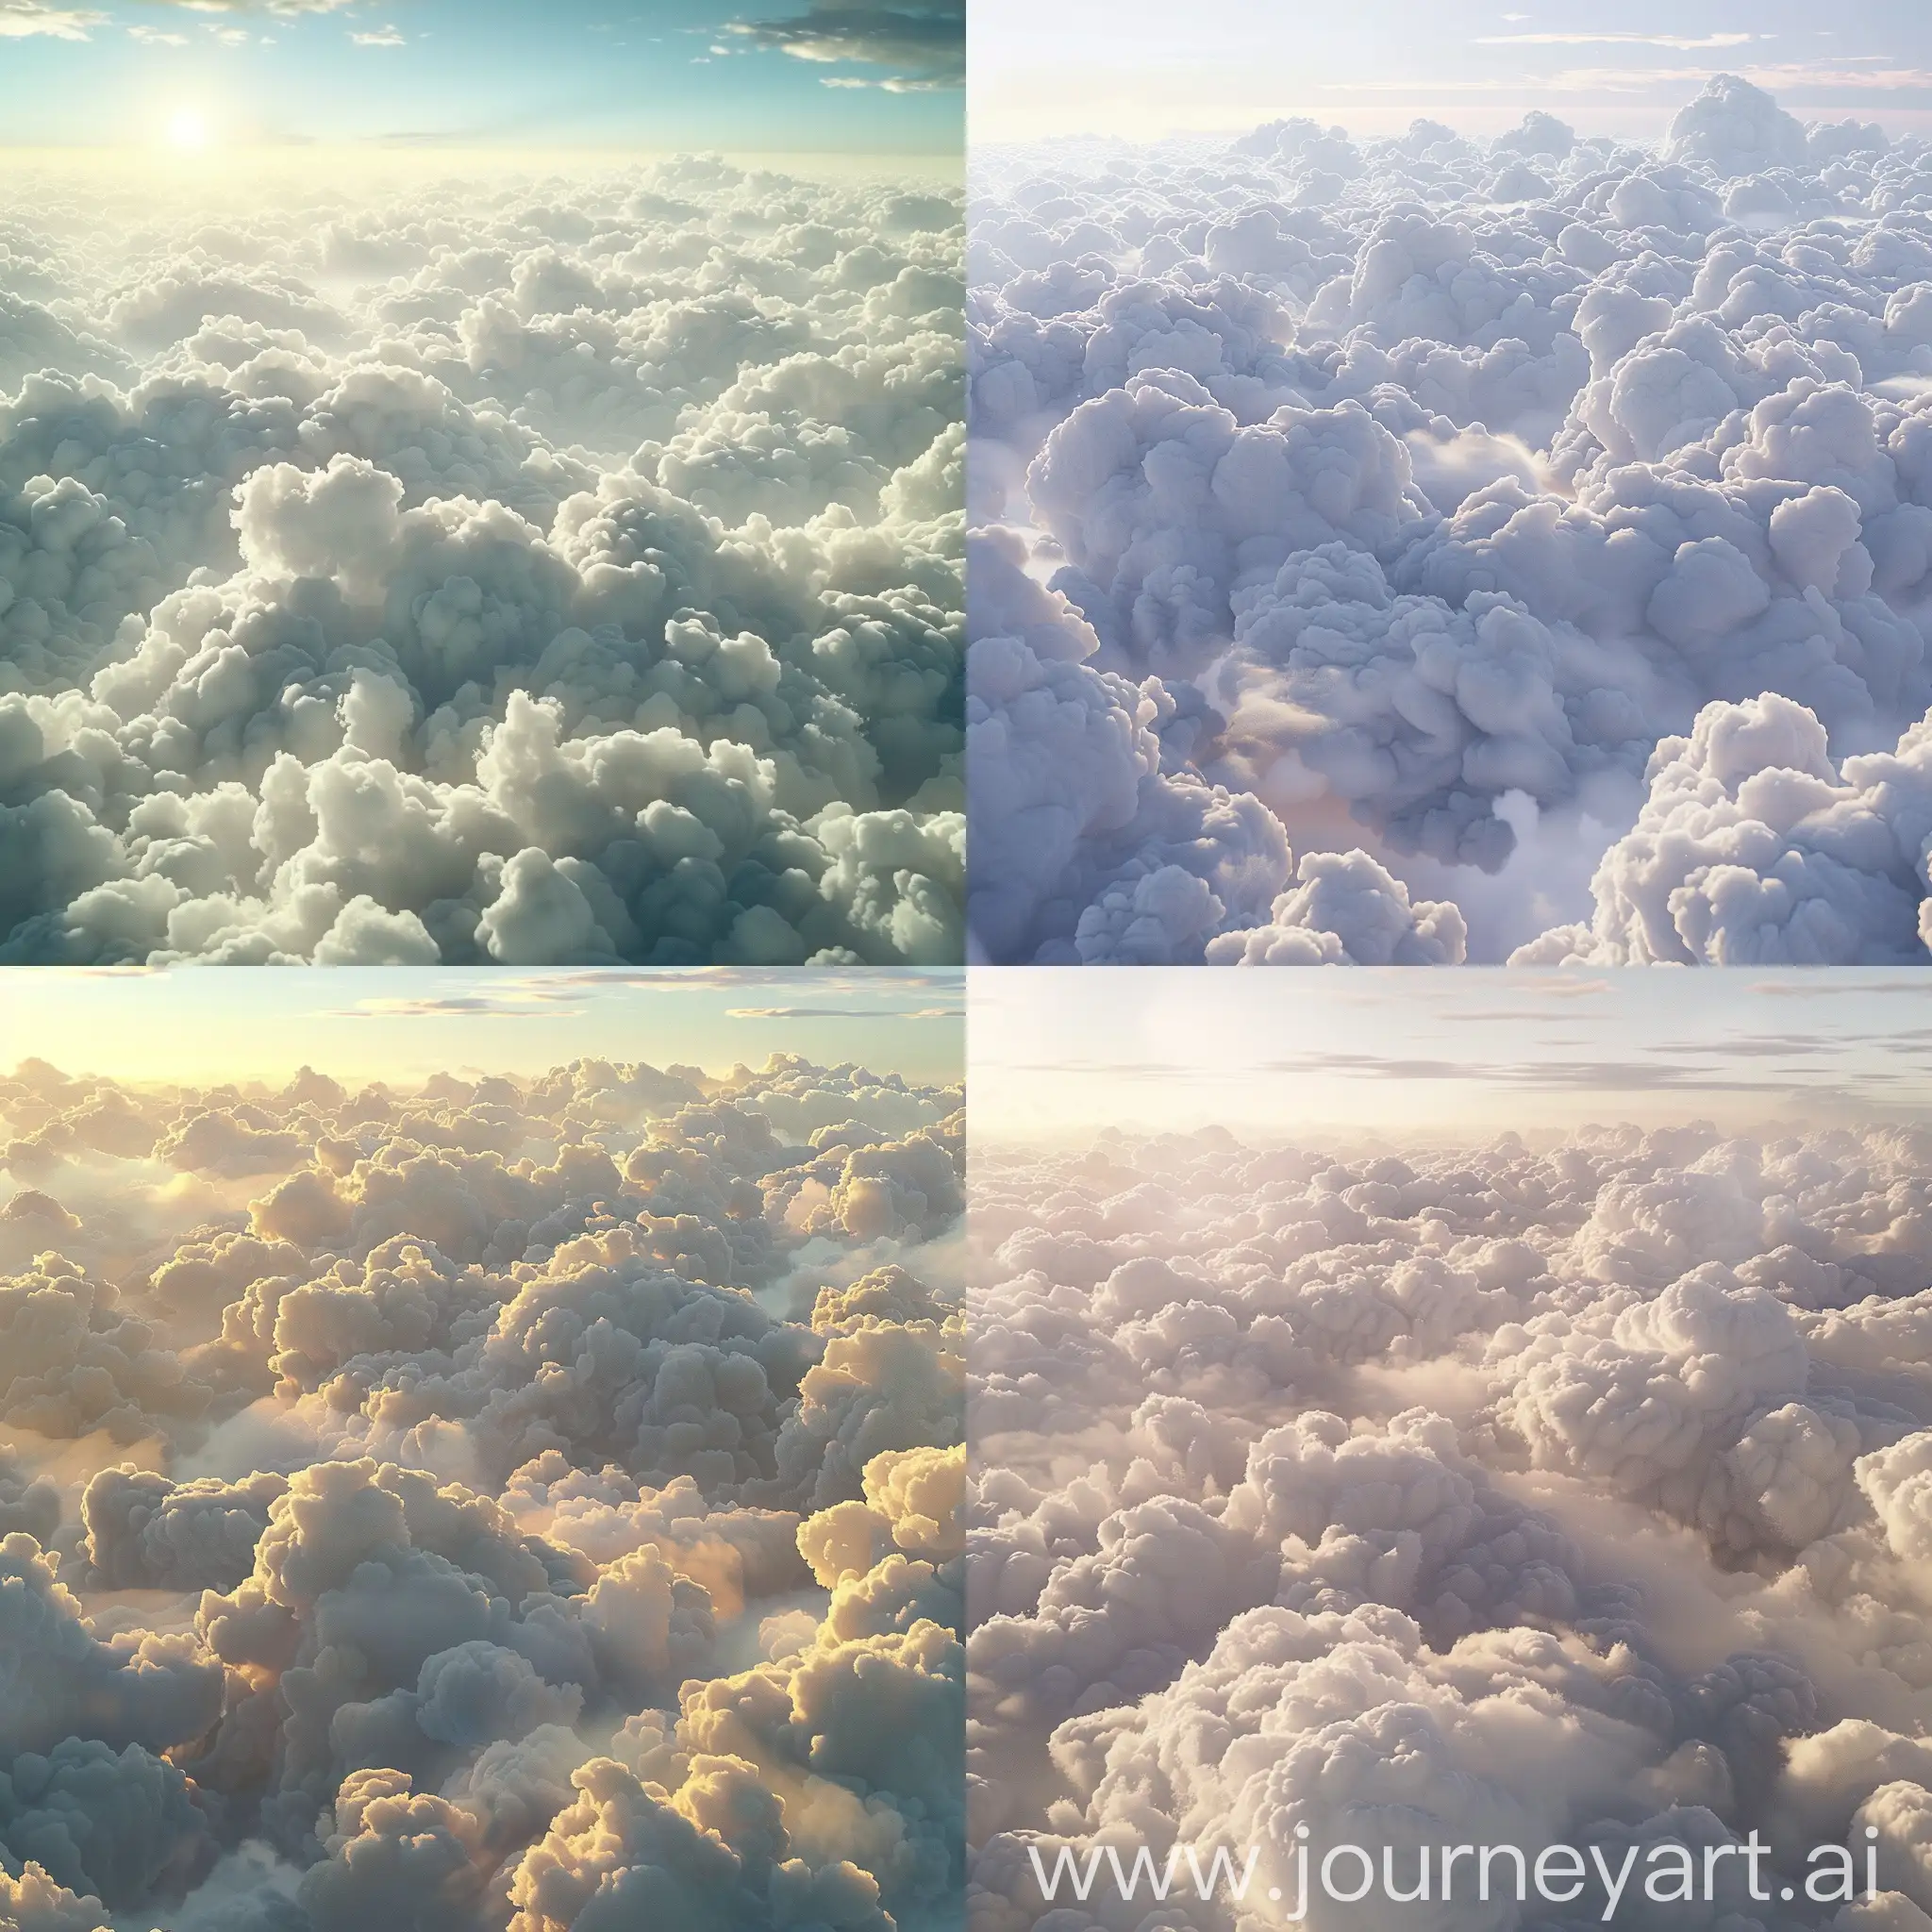 Photorealistic. 4K. A breathtaking aerial view of a vast expanse of dense, turbulent white clouds with complex structures in the form of patterns and mini-vortices. Dark brown clouds are visible in the gaps under the clouds. All this is covered with a creamy haze. The clear pale blue sky overhead stretches endlessly towards the horizon. Sunlight resembles early twilight.